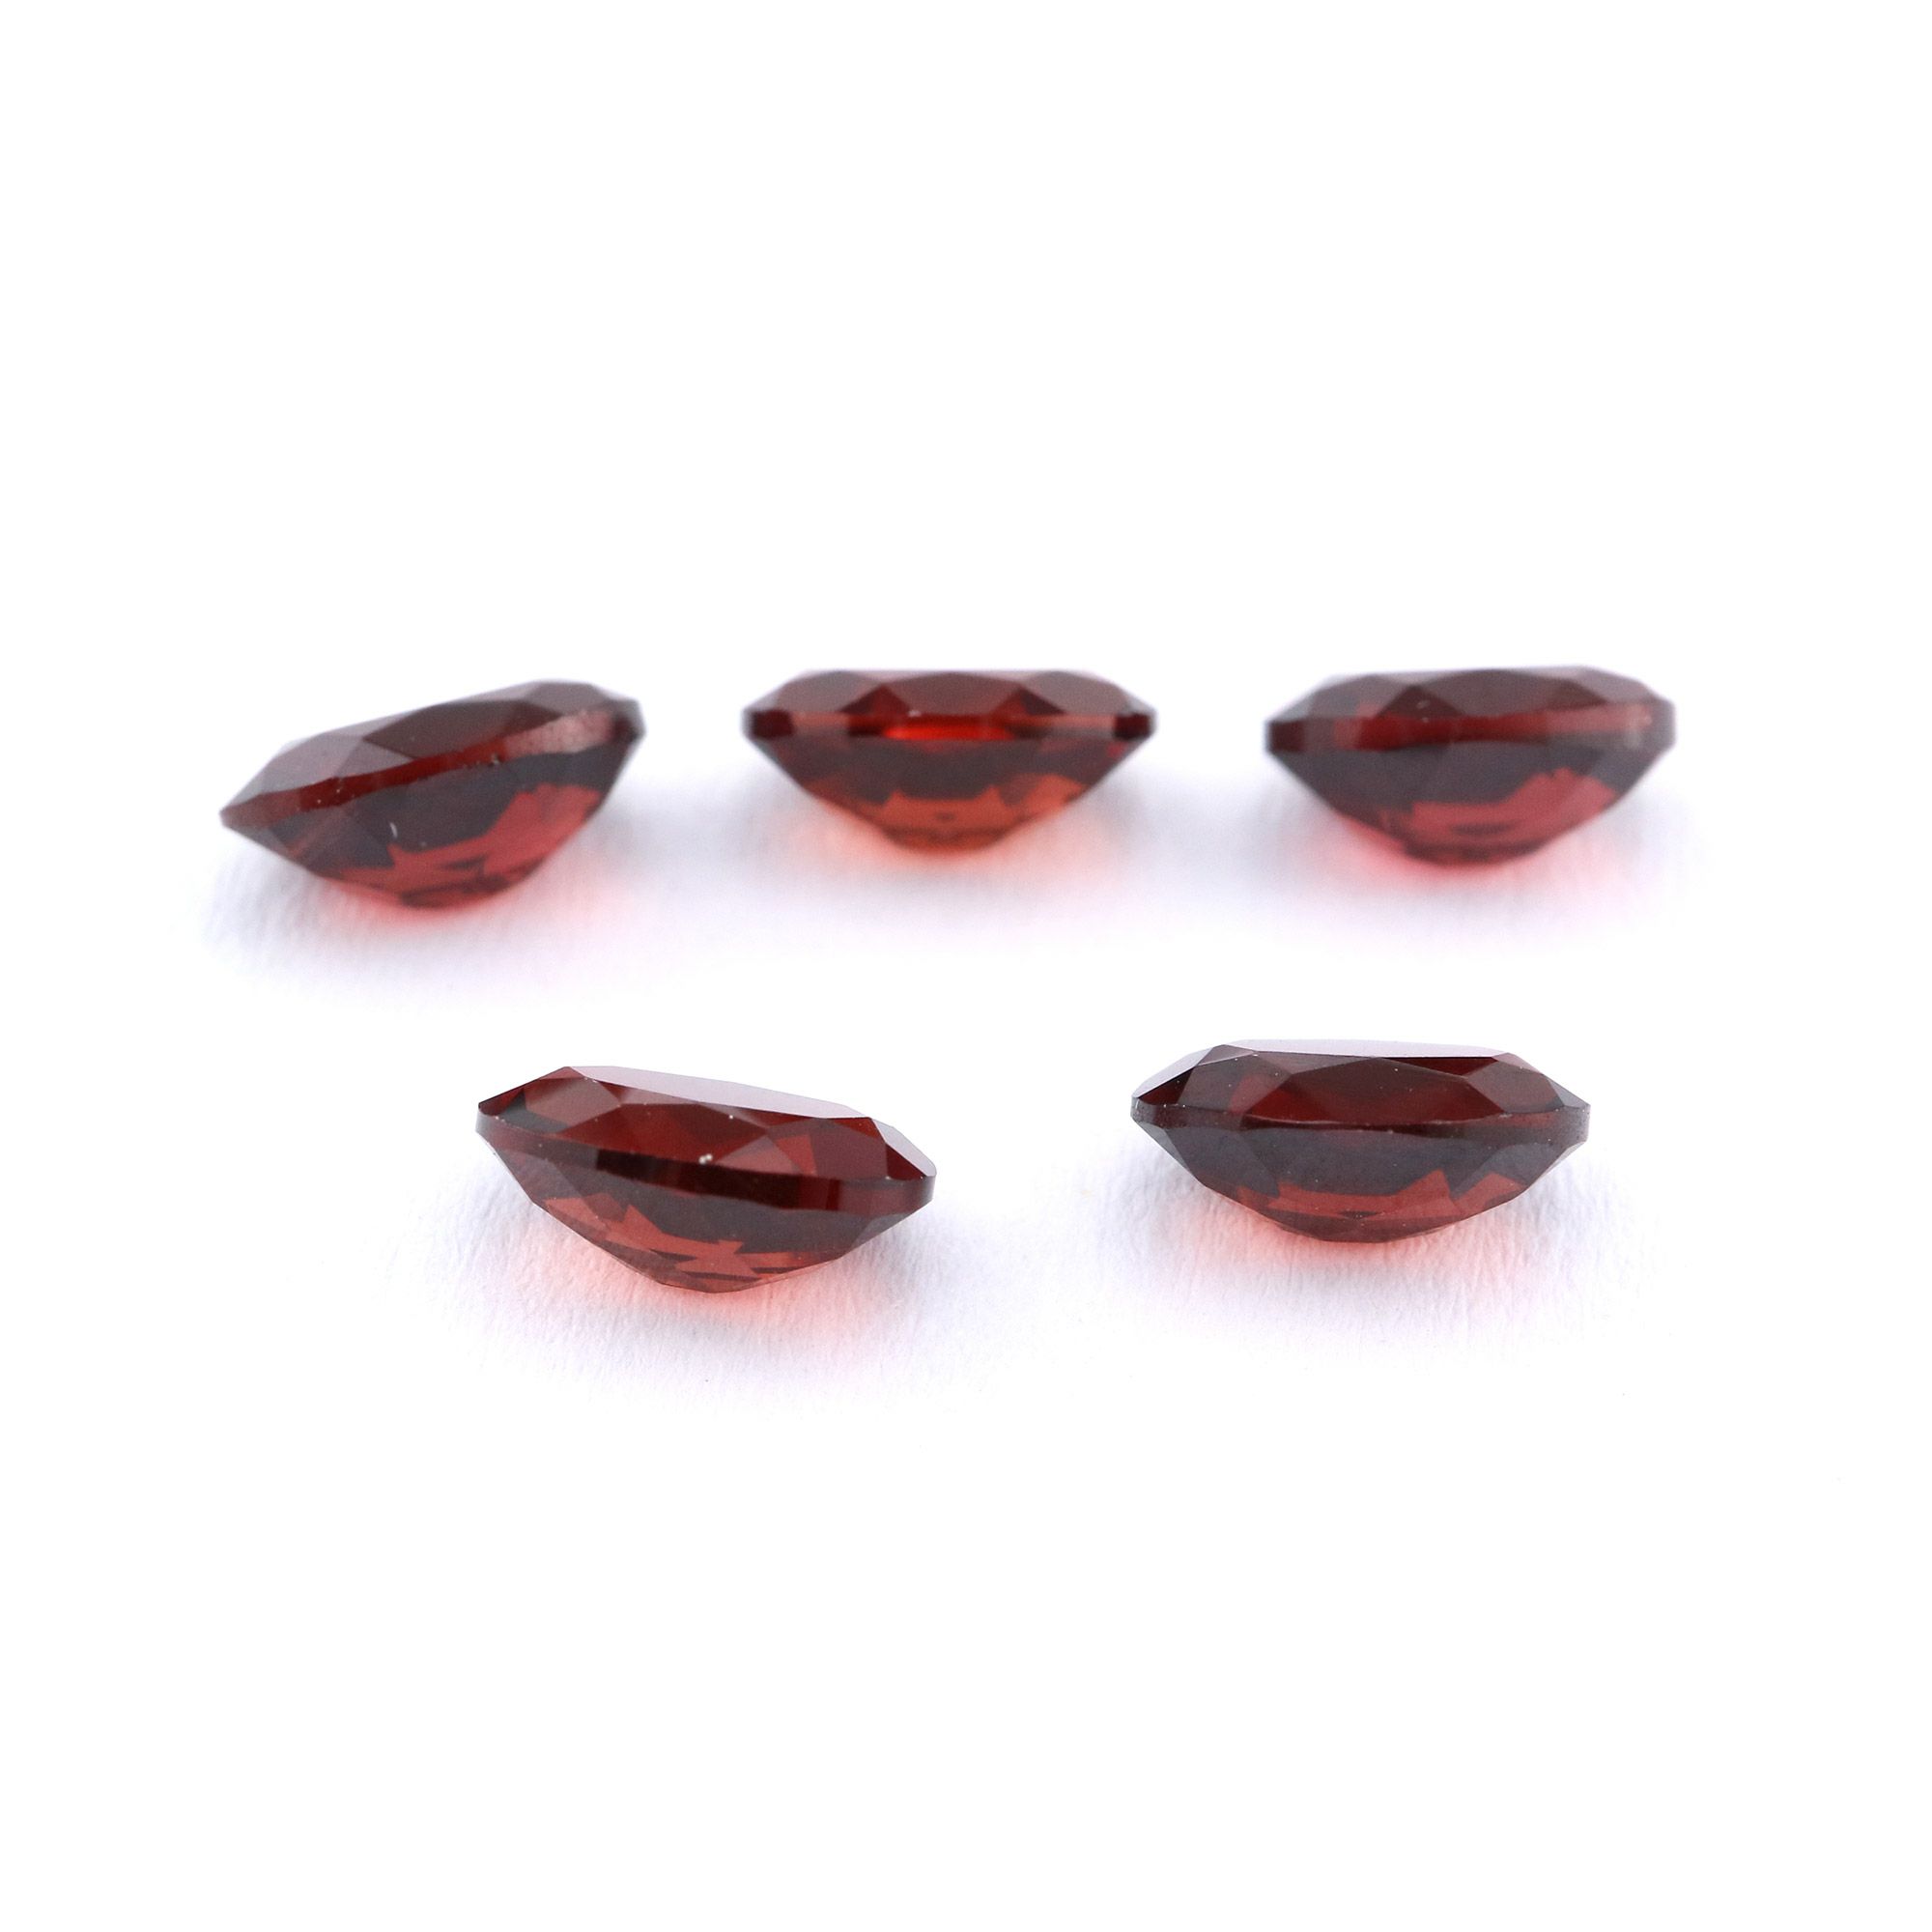 5Pcs Oval Red Garnet January Birthstone Faceted Cut Loose Gemstone Natural Semi Precious Stone DIY Jewelry Supplies 4120124 - Click Image to Close